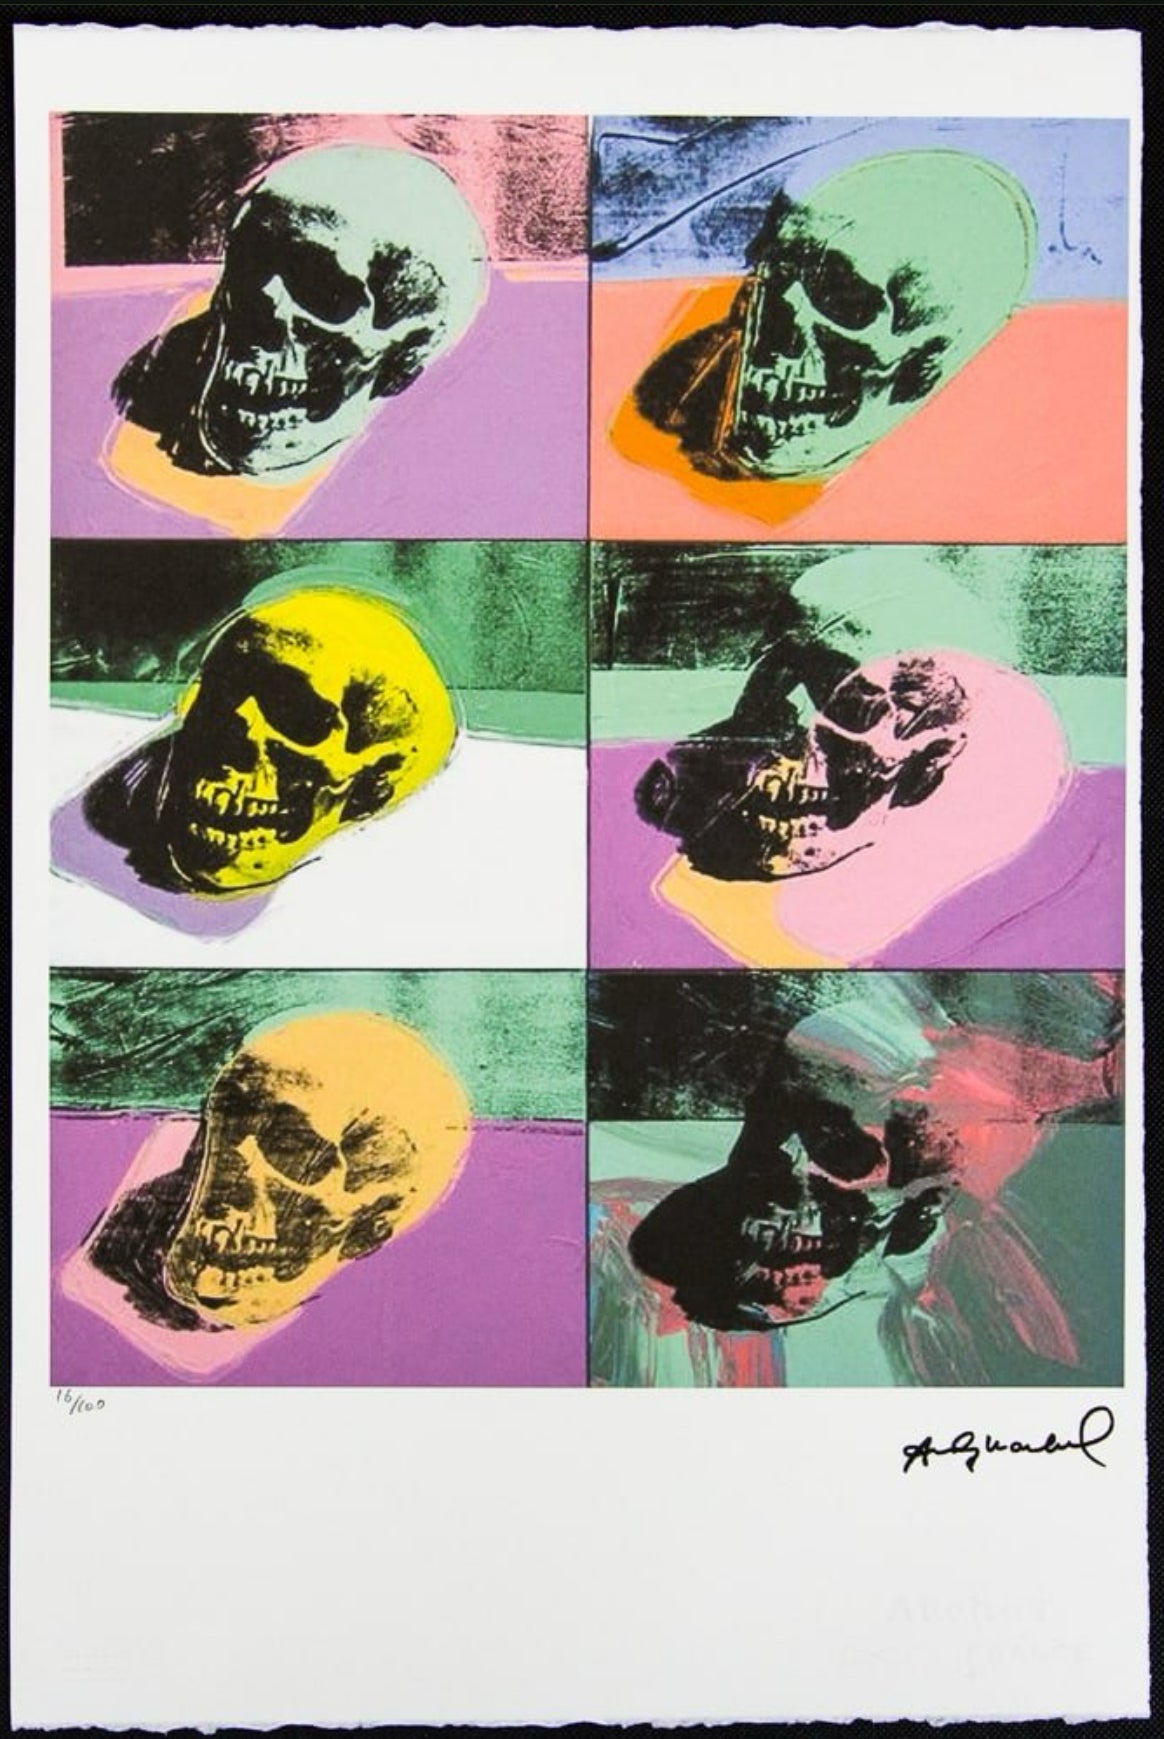 ‘Skull’ by Andy Warhol